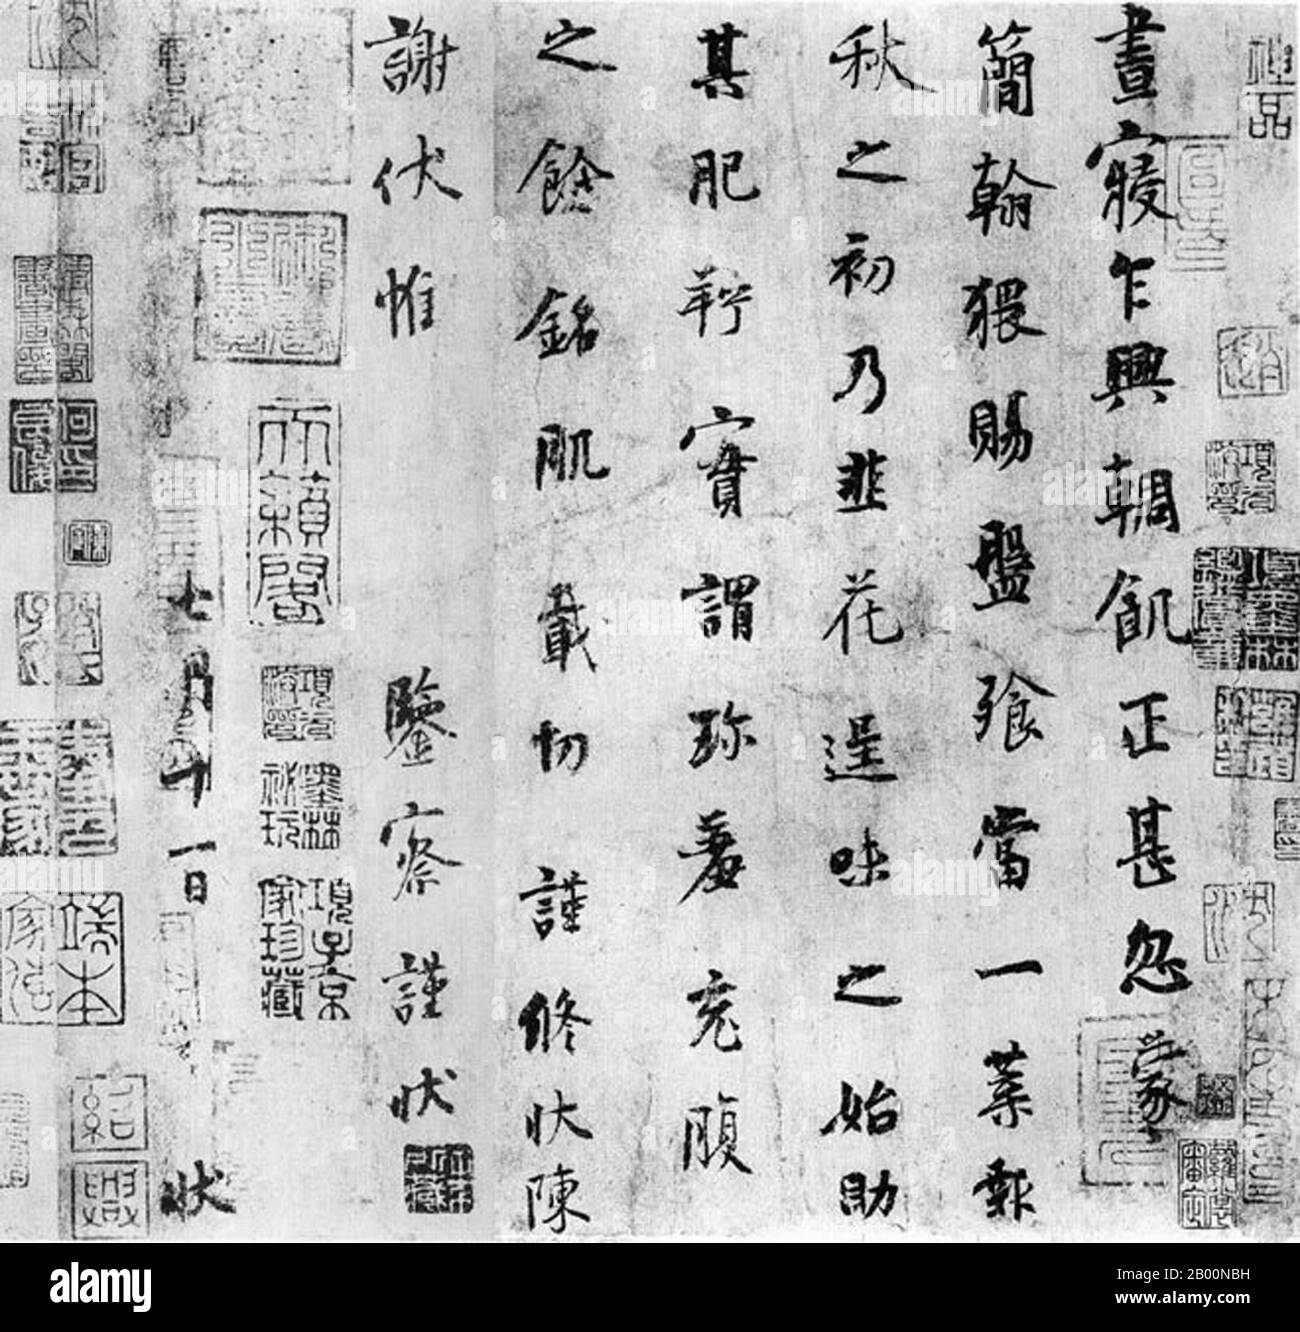 China: Chinese script. Tang Dynasty. Attributed to Yang Ning-Shi (873-954), student of Yan Zhenqing.  Yan Zhenqing’s style assimilated the essence of the past five hundred years, and almost all the calligraphers after him were more or less influenced by him. In his contemporary period, another great master calligrapher, Liu Gongquan, studied under him, and the much-respected Five-Dynasty Period calligrapher, Yang Ningshi (楊凝式) thoroughly inherited Yan Zhenqing’s style and made it bolder. Stock Photo